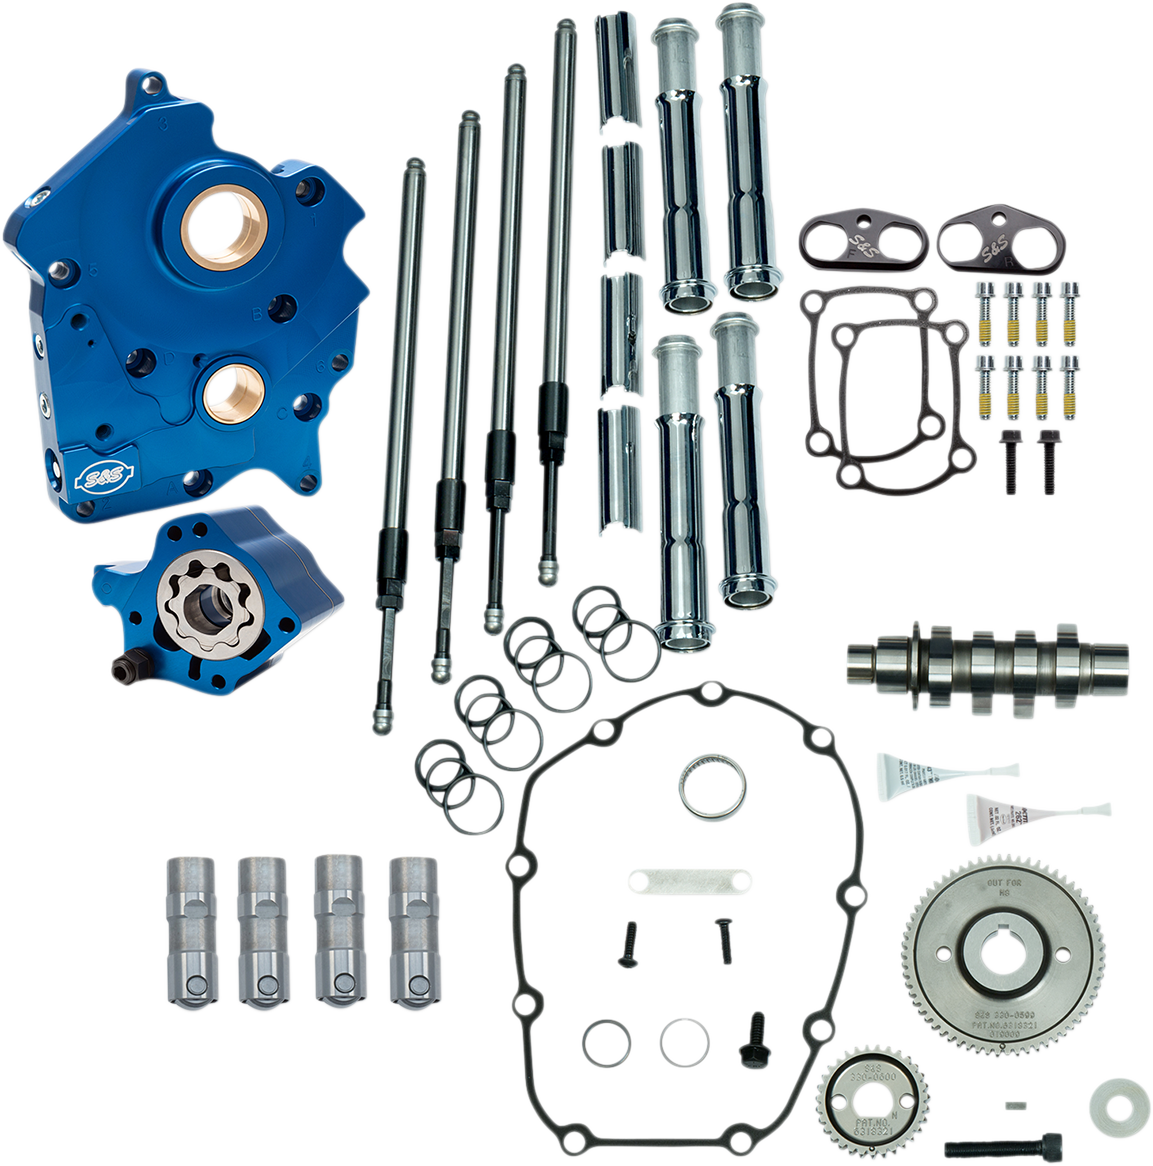 S&S CYCLE Cam Chest Kit with Plate M8 - Gear Drive - Water Cooled - 465 Cam - Chrome Pushrods 310-1001A